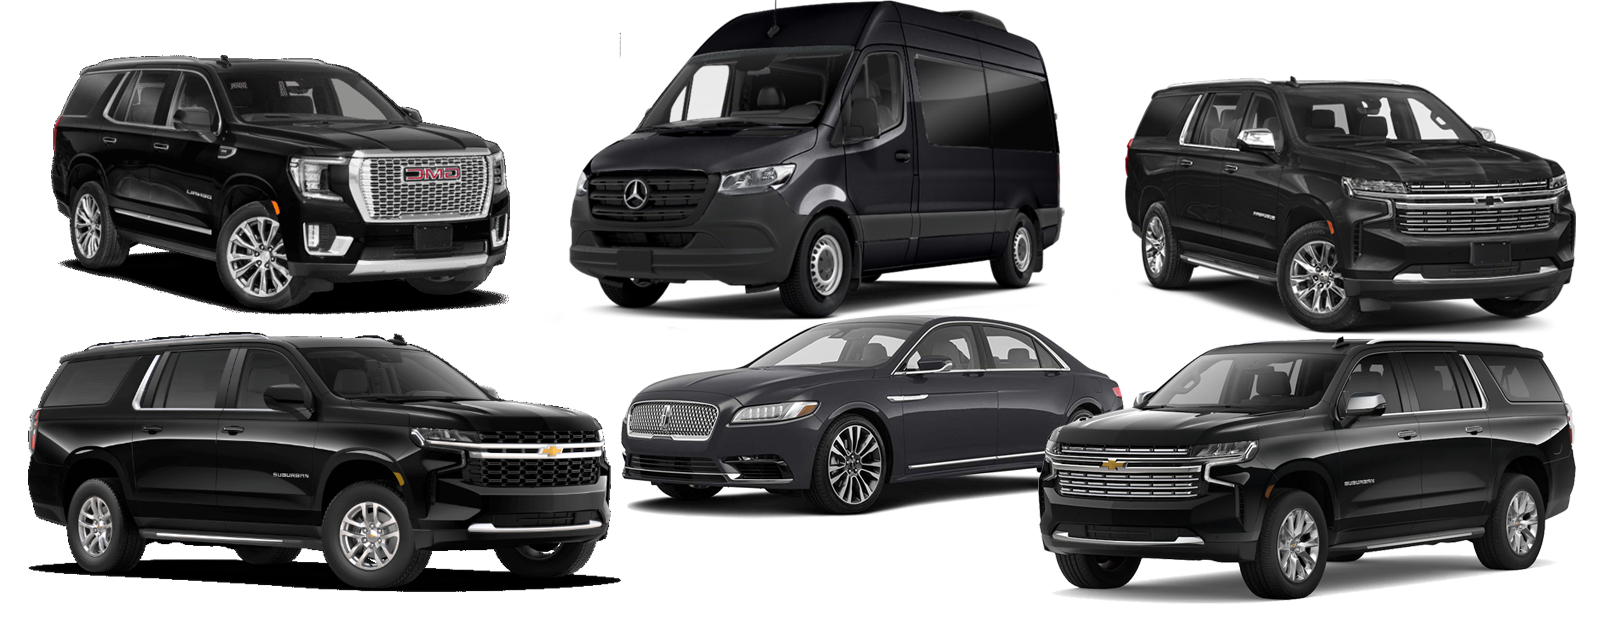 Alpha Wolf luxury limousine services in Colorado,limousine service in colorado,limousine service in colorado springs co, Home